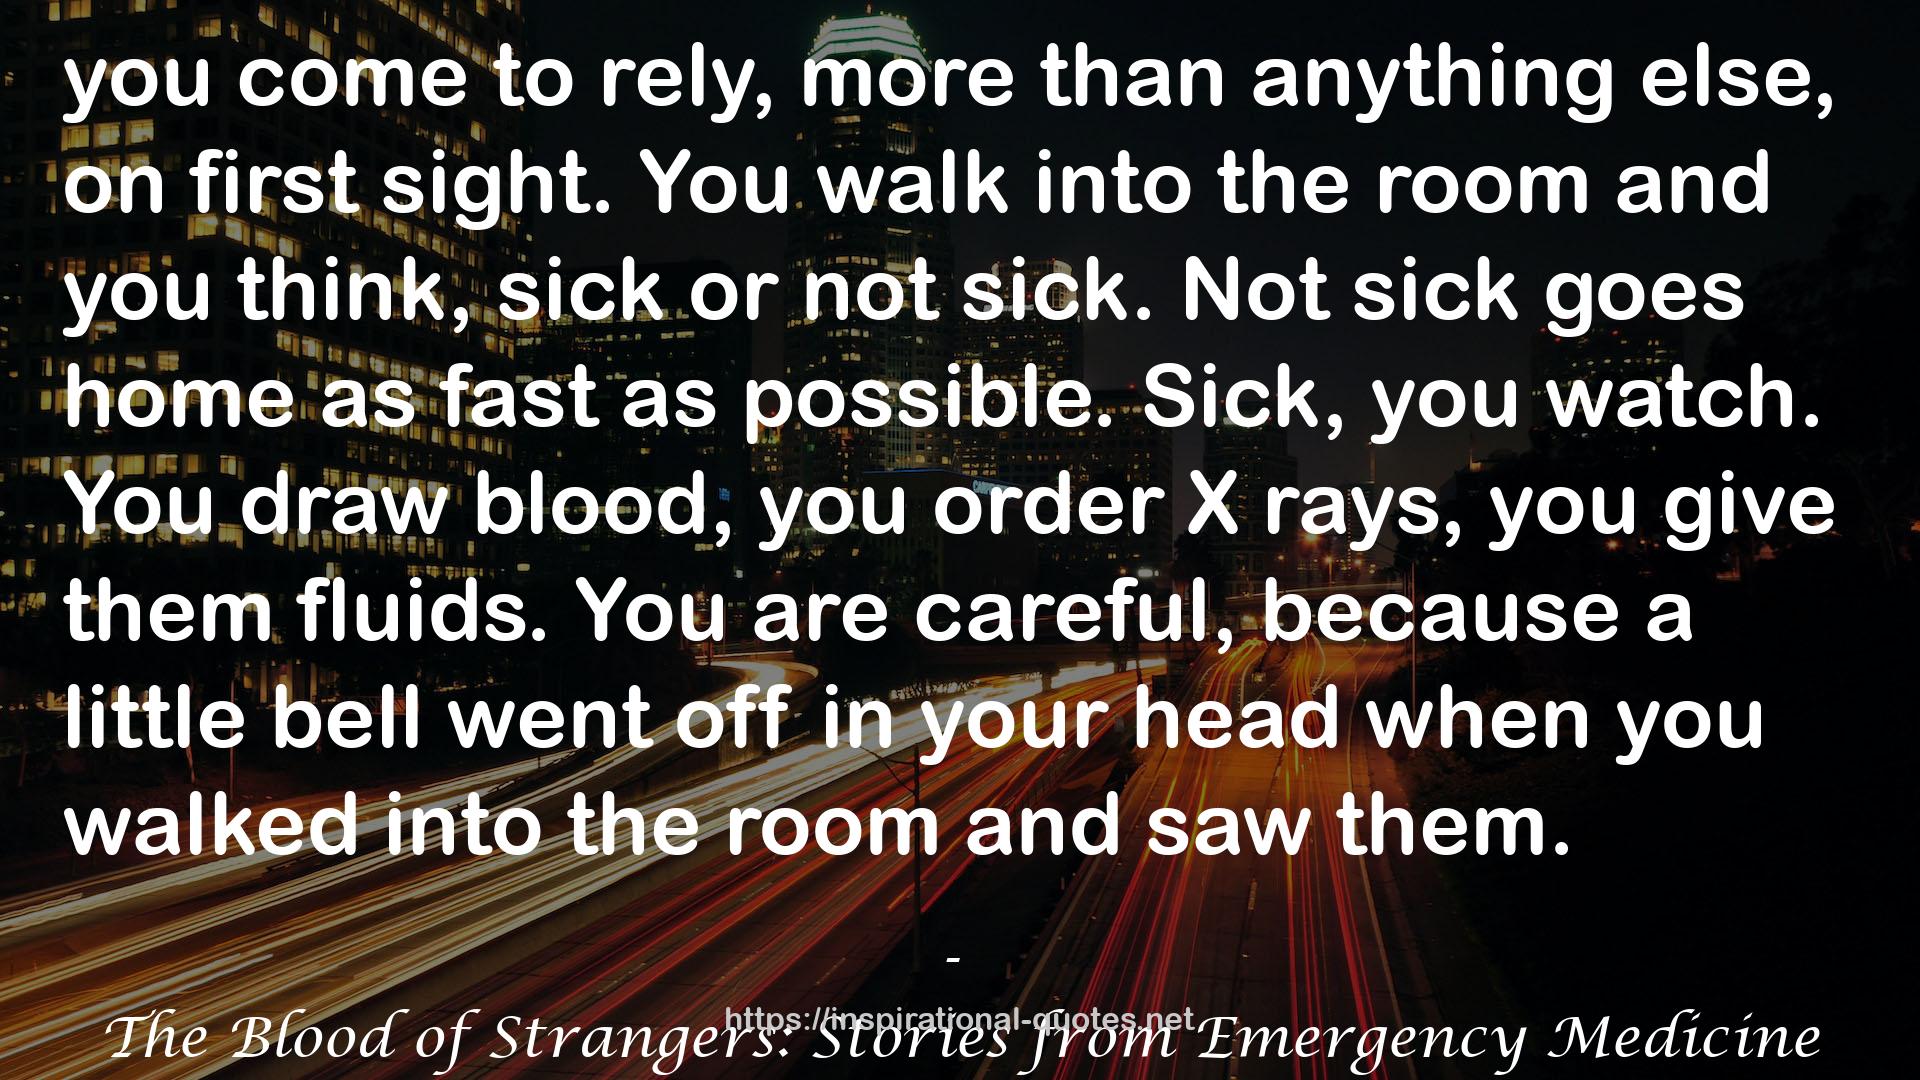 The Blood of Strangers: Stories from Emergency Medicine QUOTES